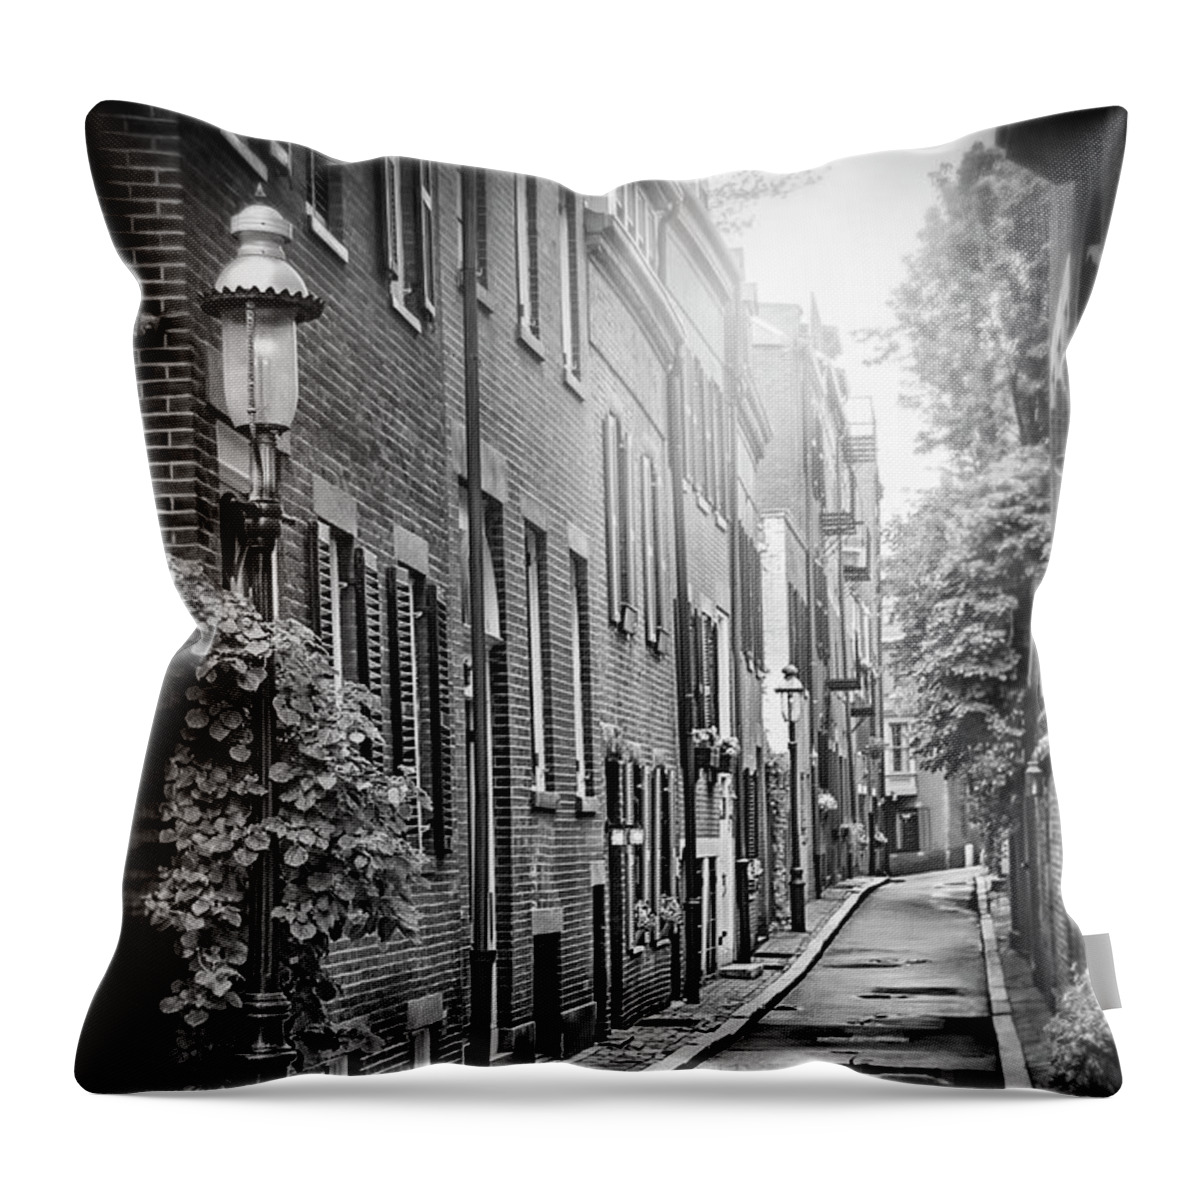 Beacon Hill Throw Pillow featuring the photograph Beacon Hill Area of Boston Black and White by Carol Japp